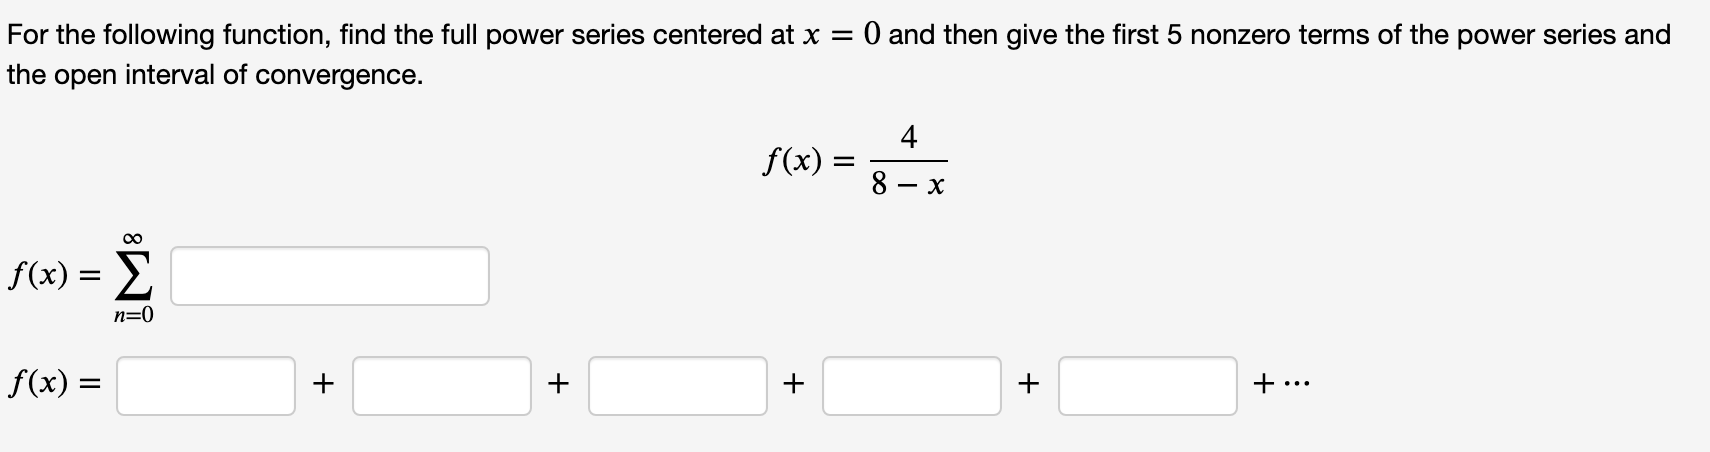 For the following function, find the full power series centered at x = 0 and then give the first 5 nonzero terms of the power series and
the open interval of convergence.
4
f(x) =
f(x) = E
n=0
f(x) =
+
+ ...
+
+
+
